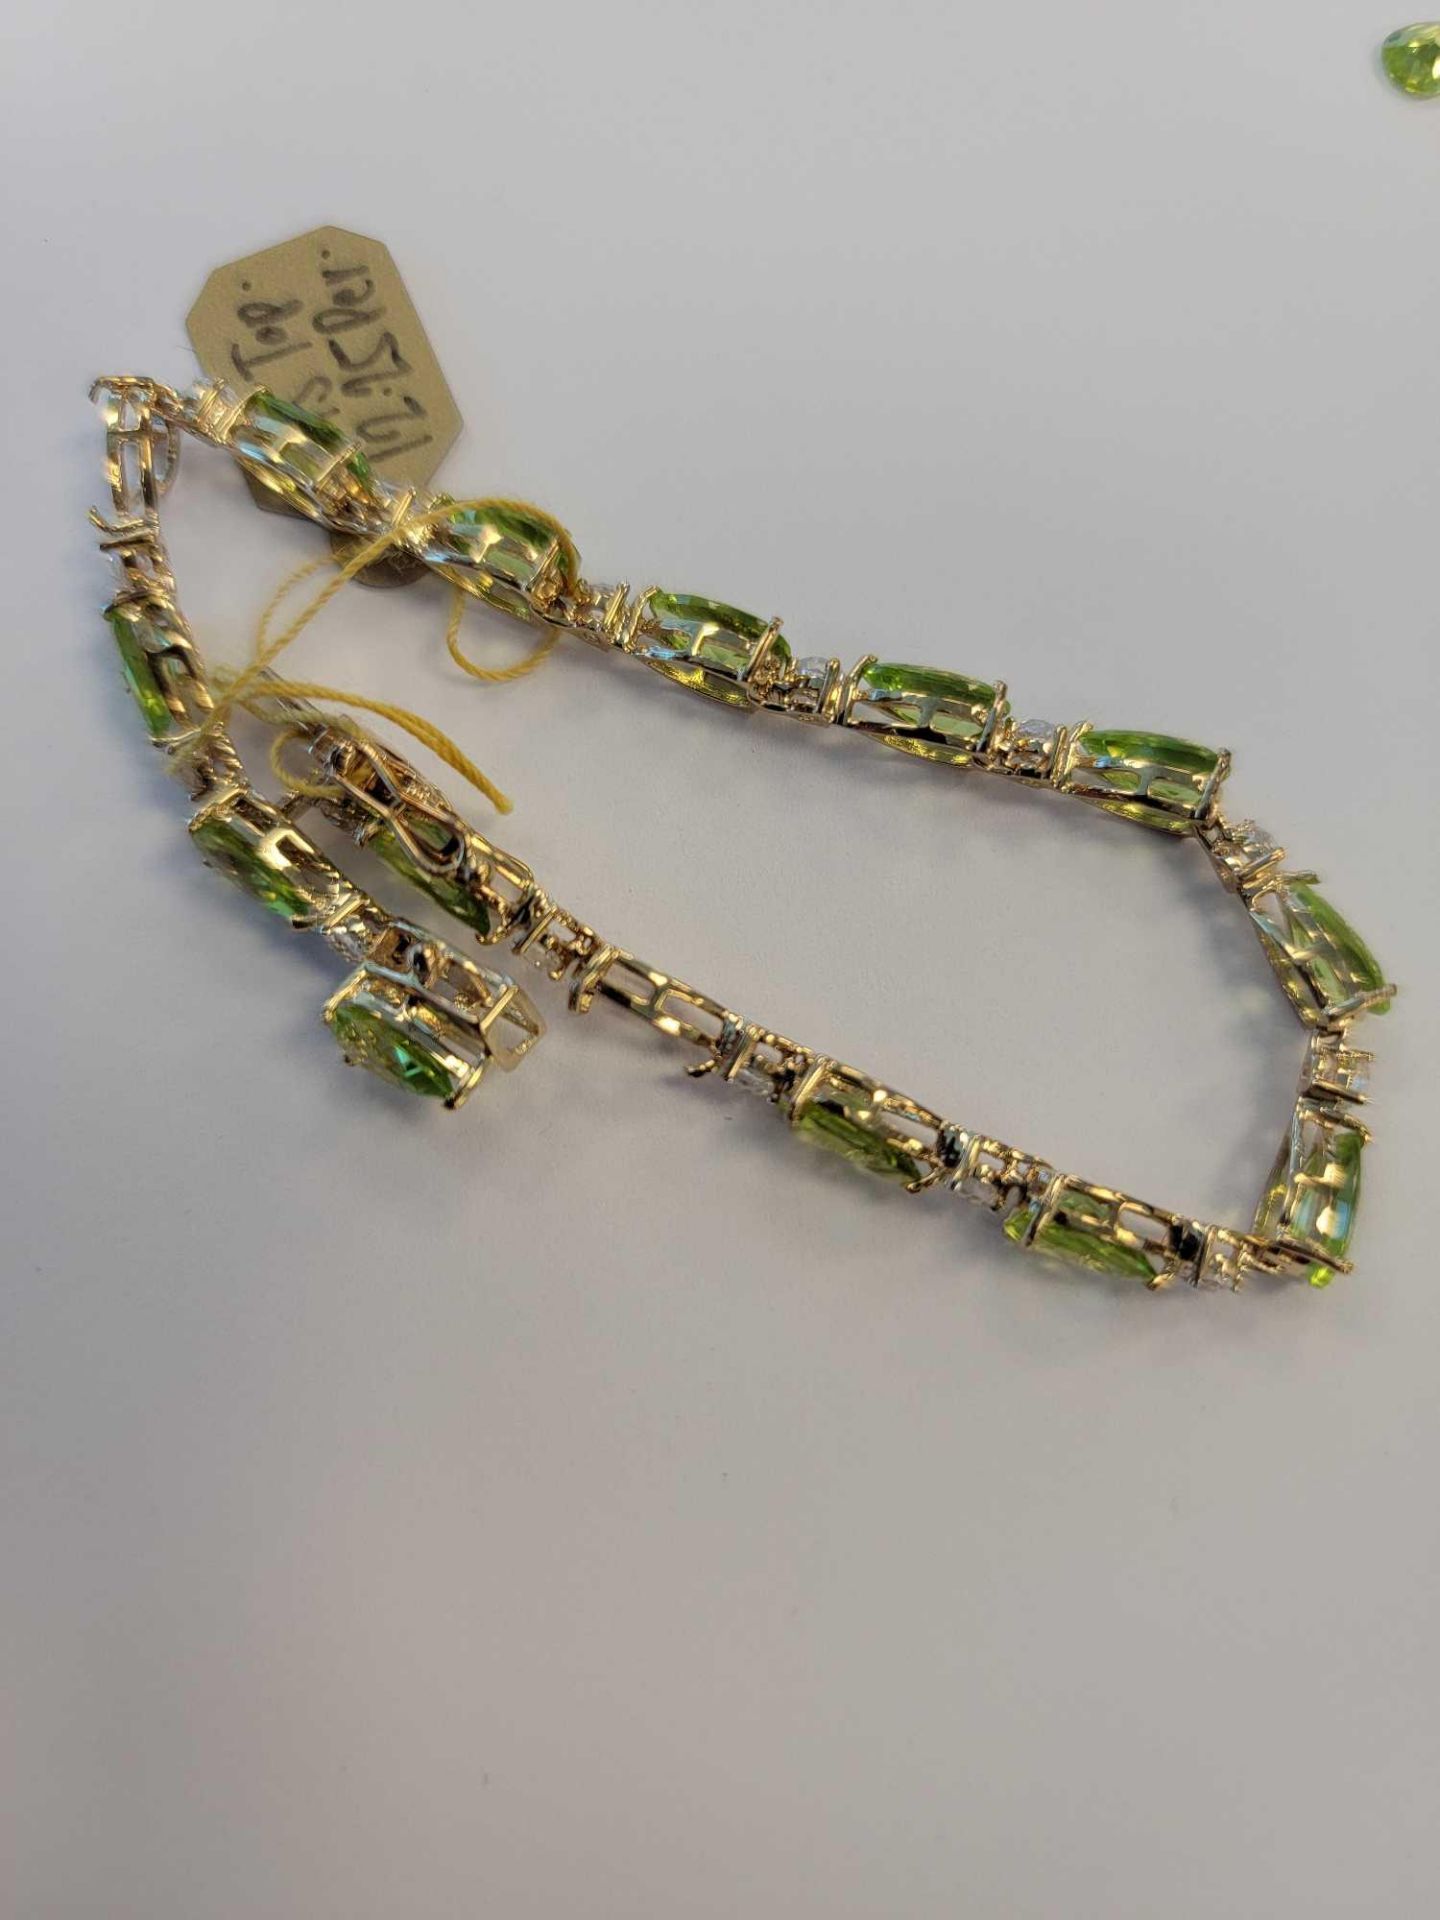 Sterling silvetr and white topaz bracelet with a few stones loose - Image 7 of 8